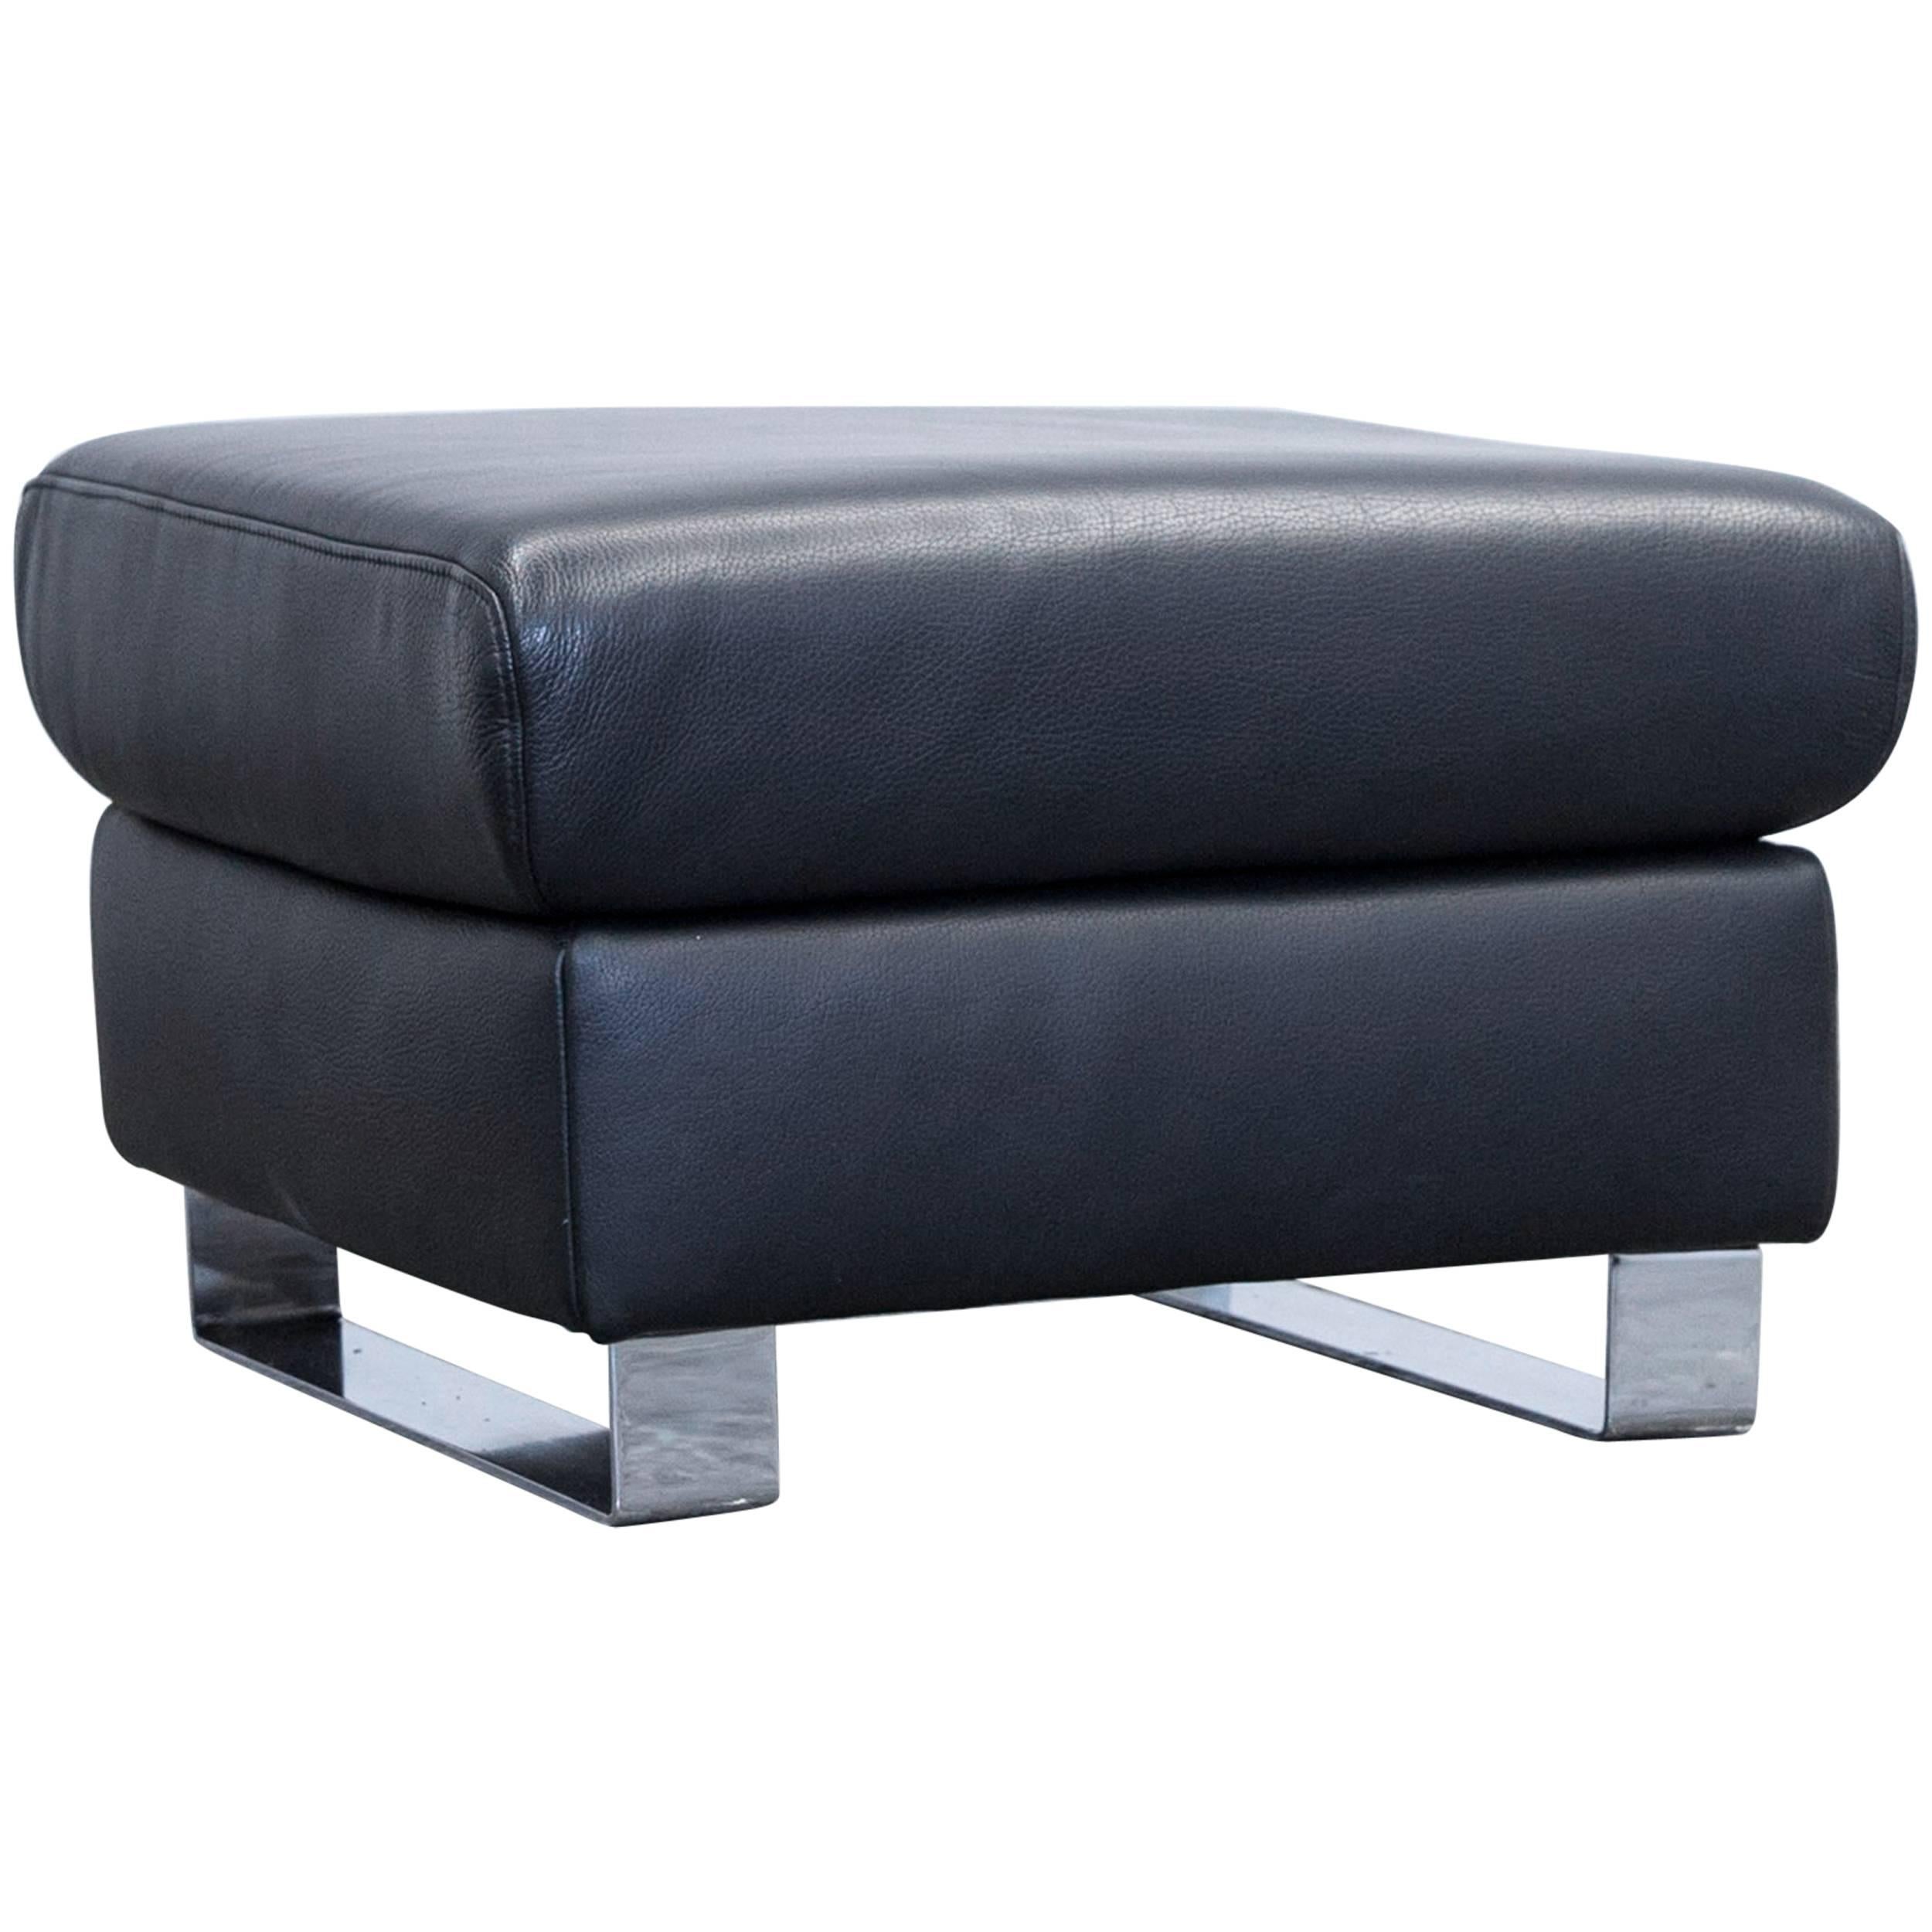 Ewald Schillig Harry Designer Footstool Leather Black One-Seat Function Couch